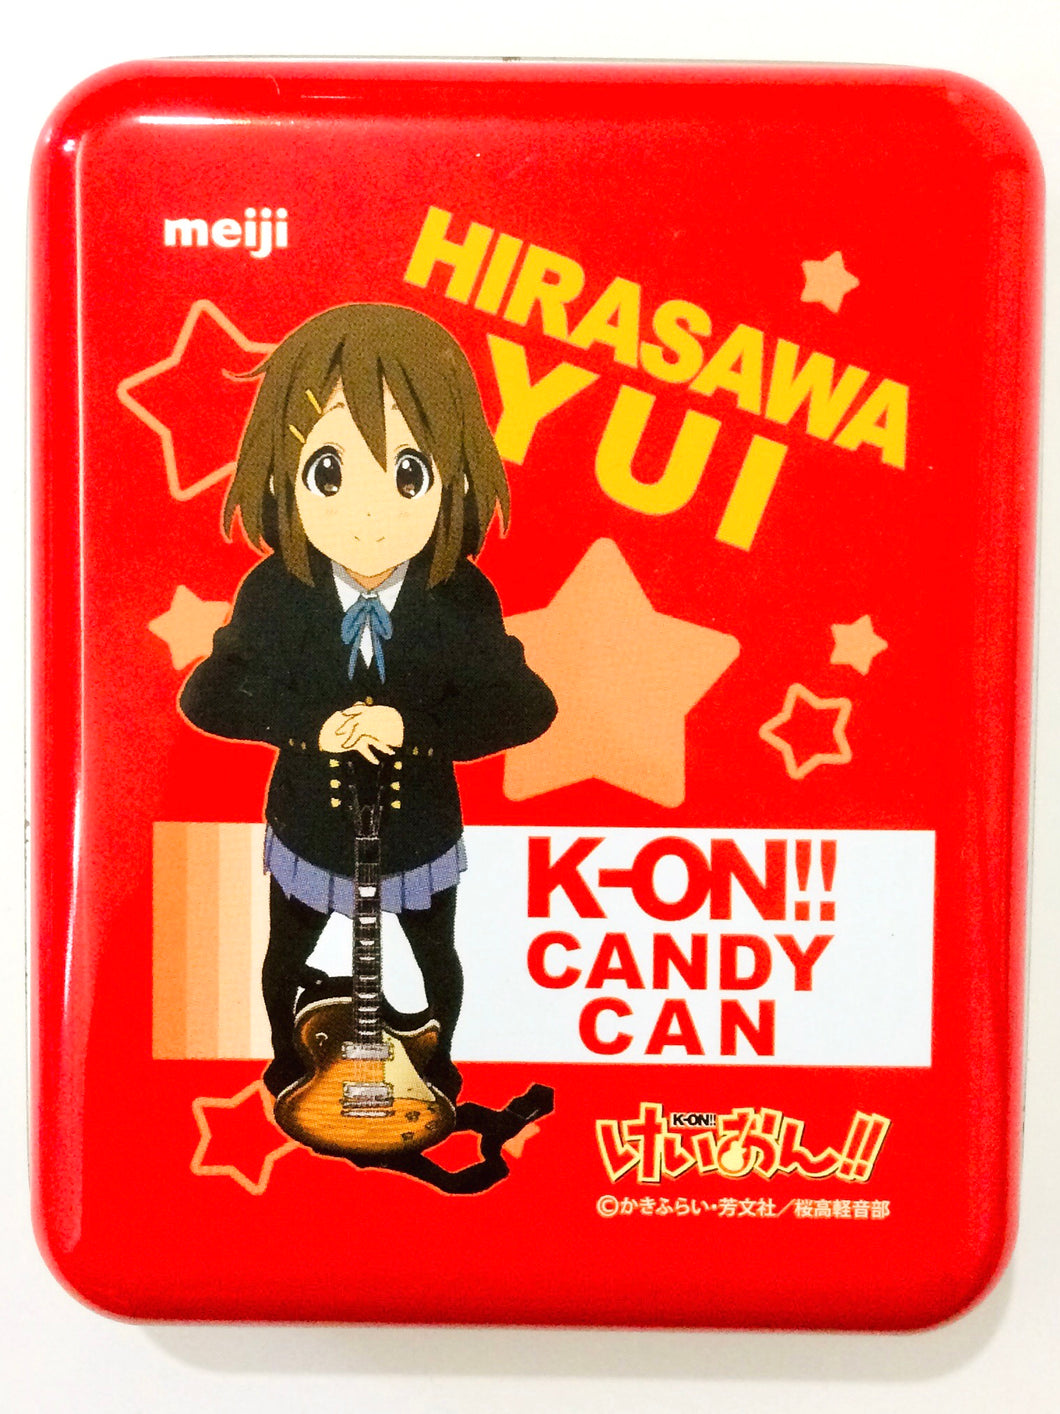 K-ON!! - Hirasawa Yui - Can Candy Container